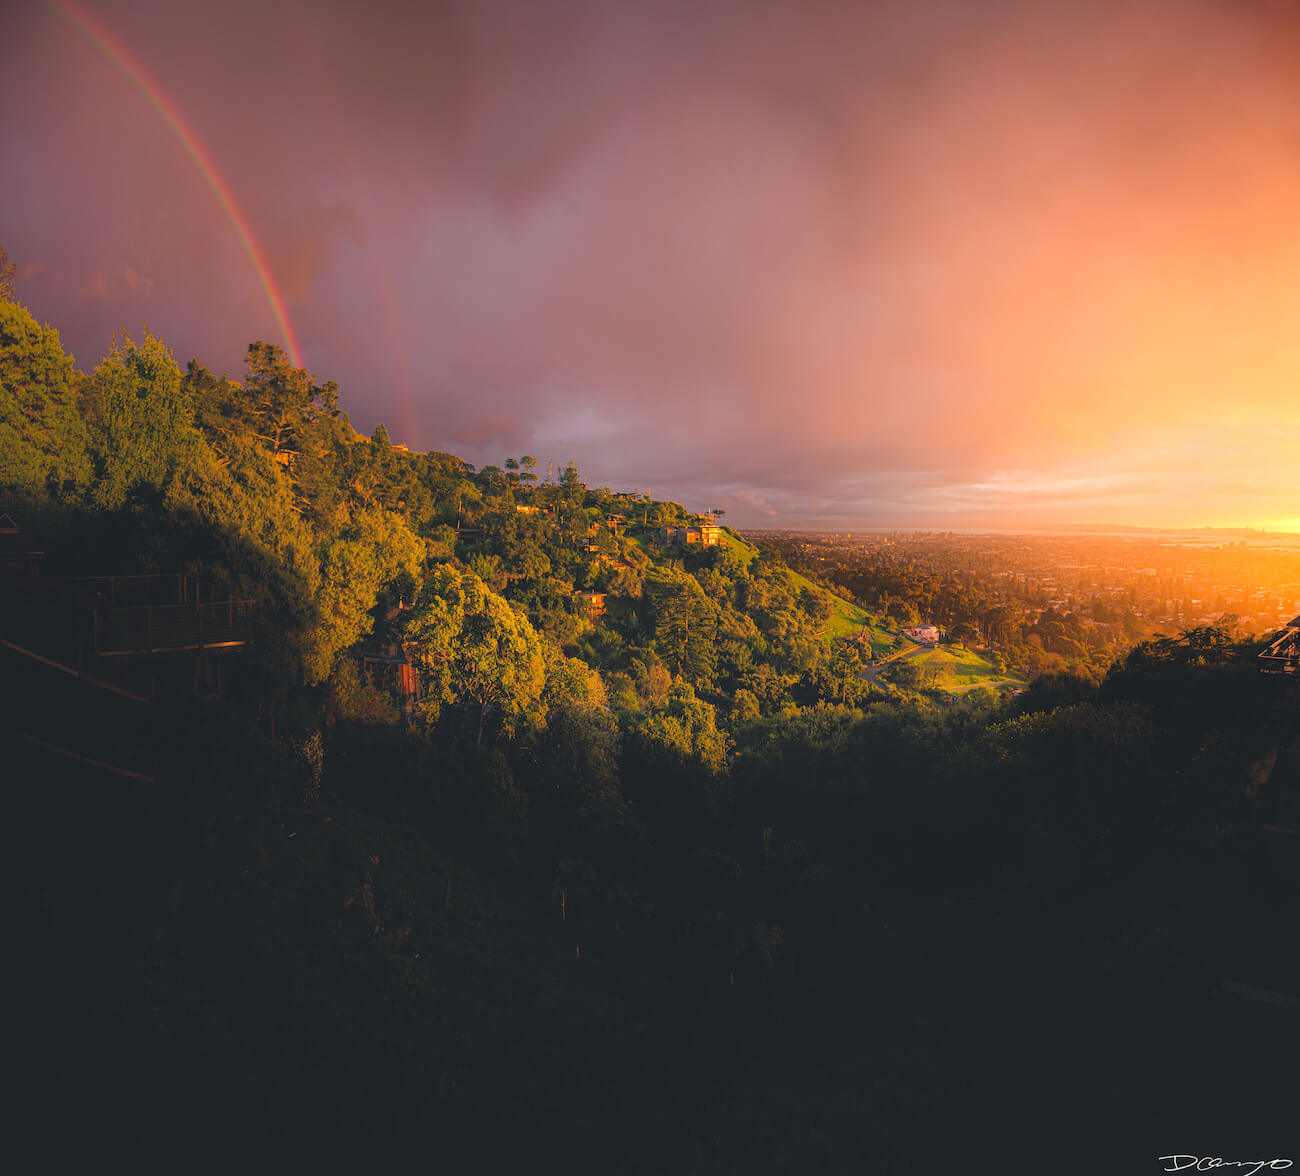 Sunset over the Berkeley Hills, CA. Shot just after a rainstorm, with a double rainbow and glowing golden sunlight illuminating the San Francisco Bay.